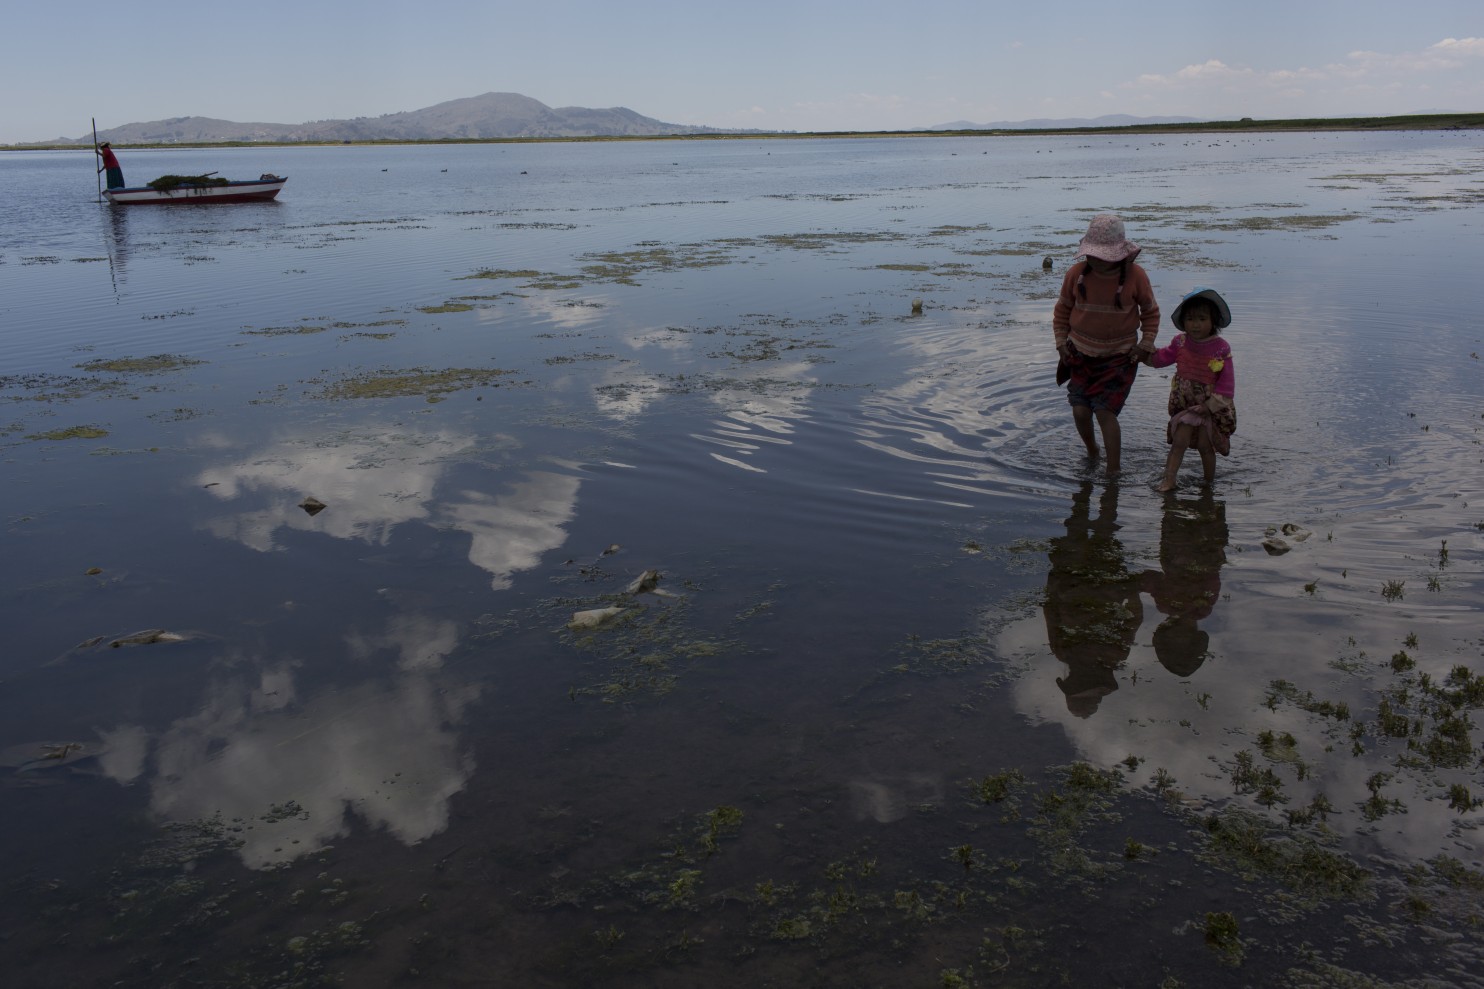 Metal pollution on Lake Titicaca